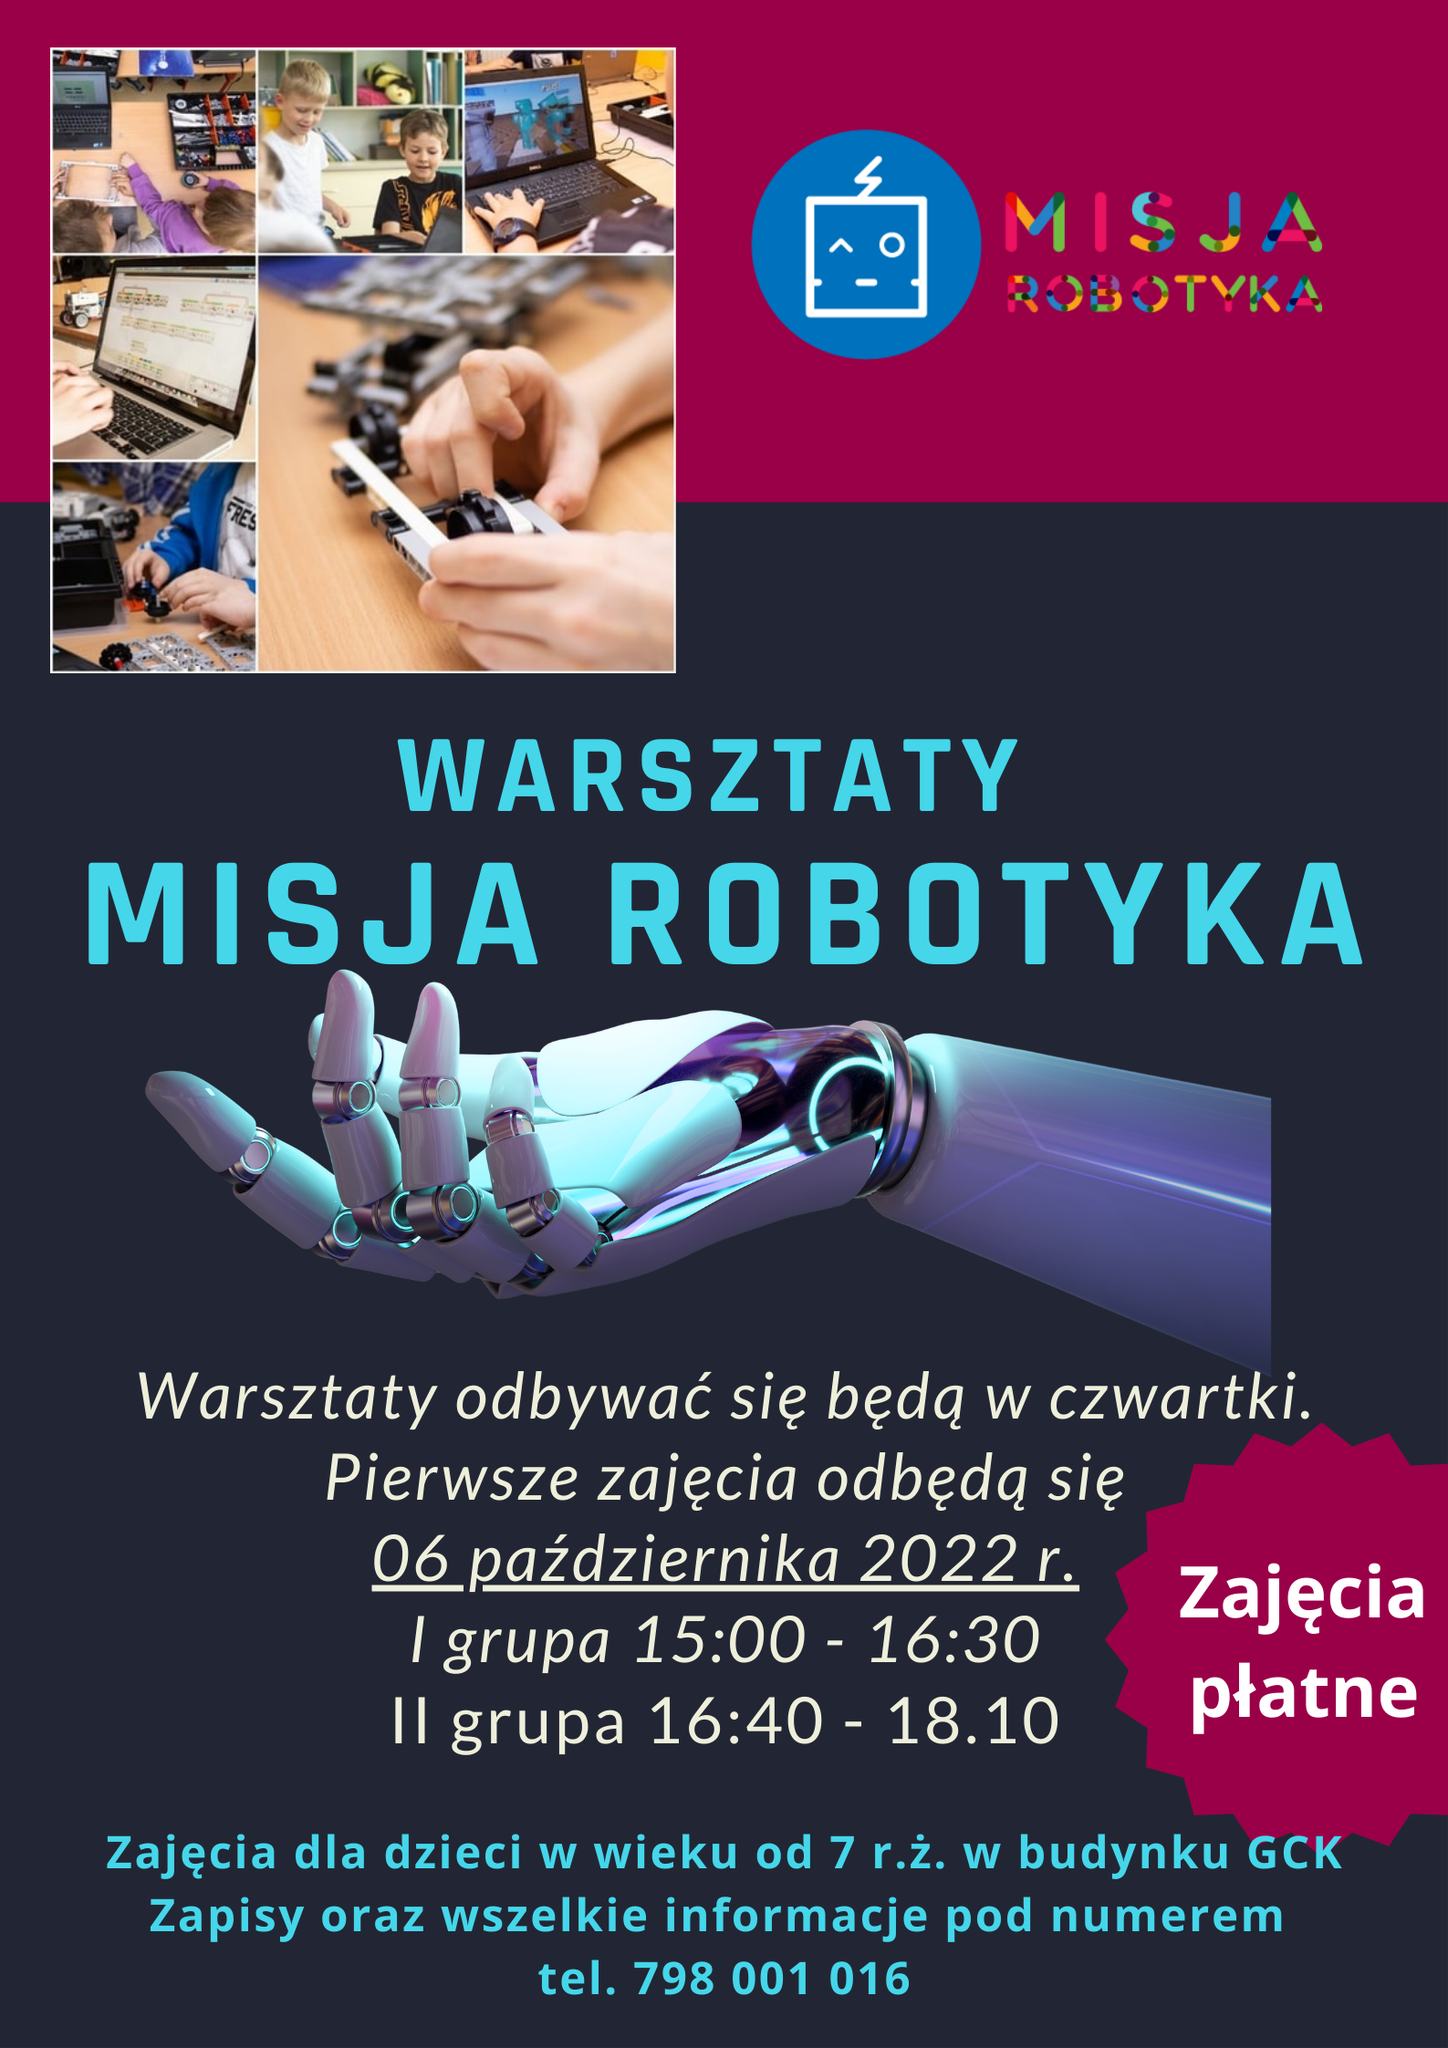 You are currently viewing Warsztaty MISJA ROBOTYKA